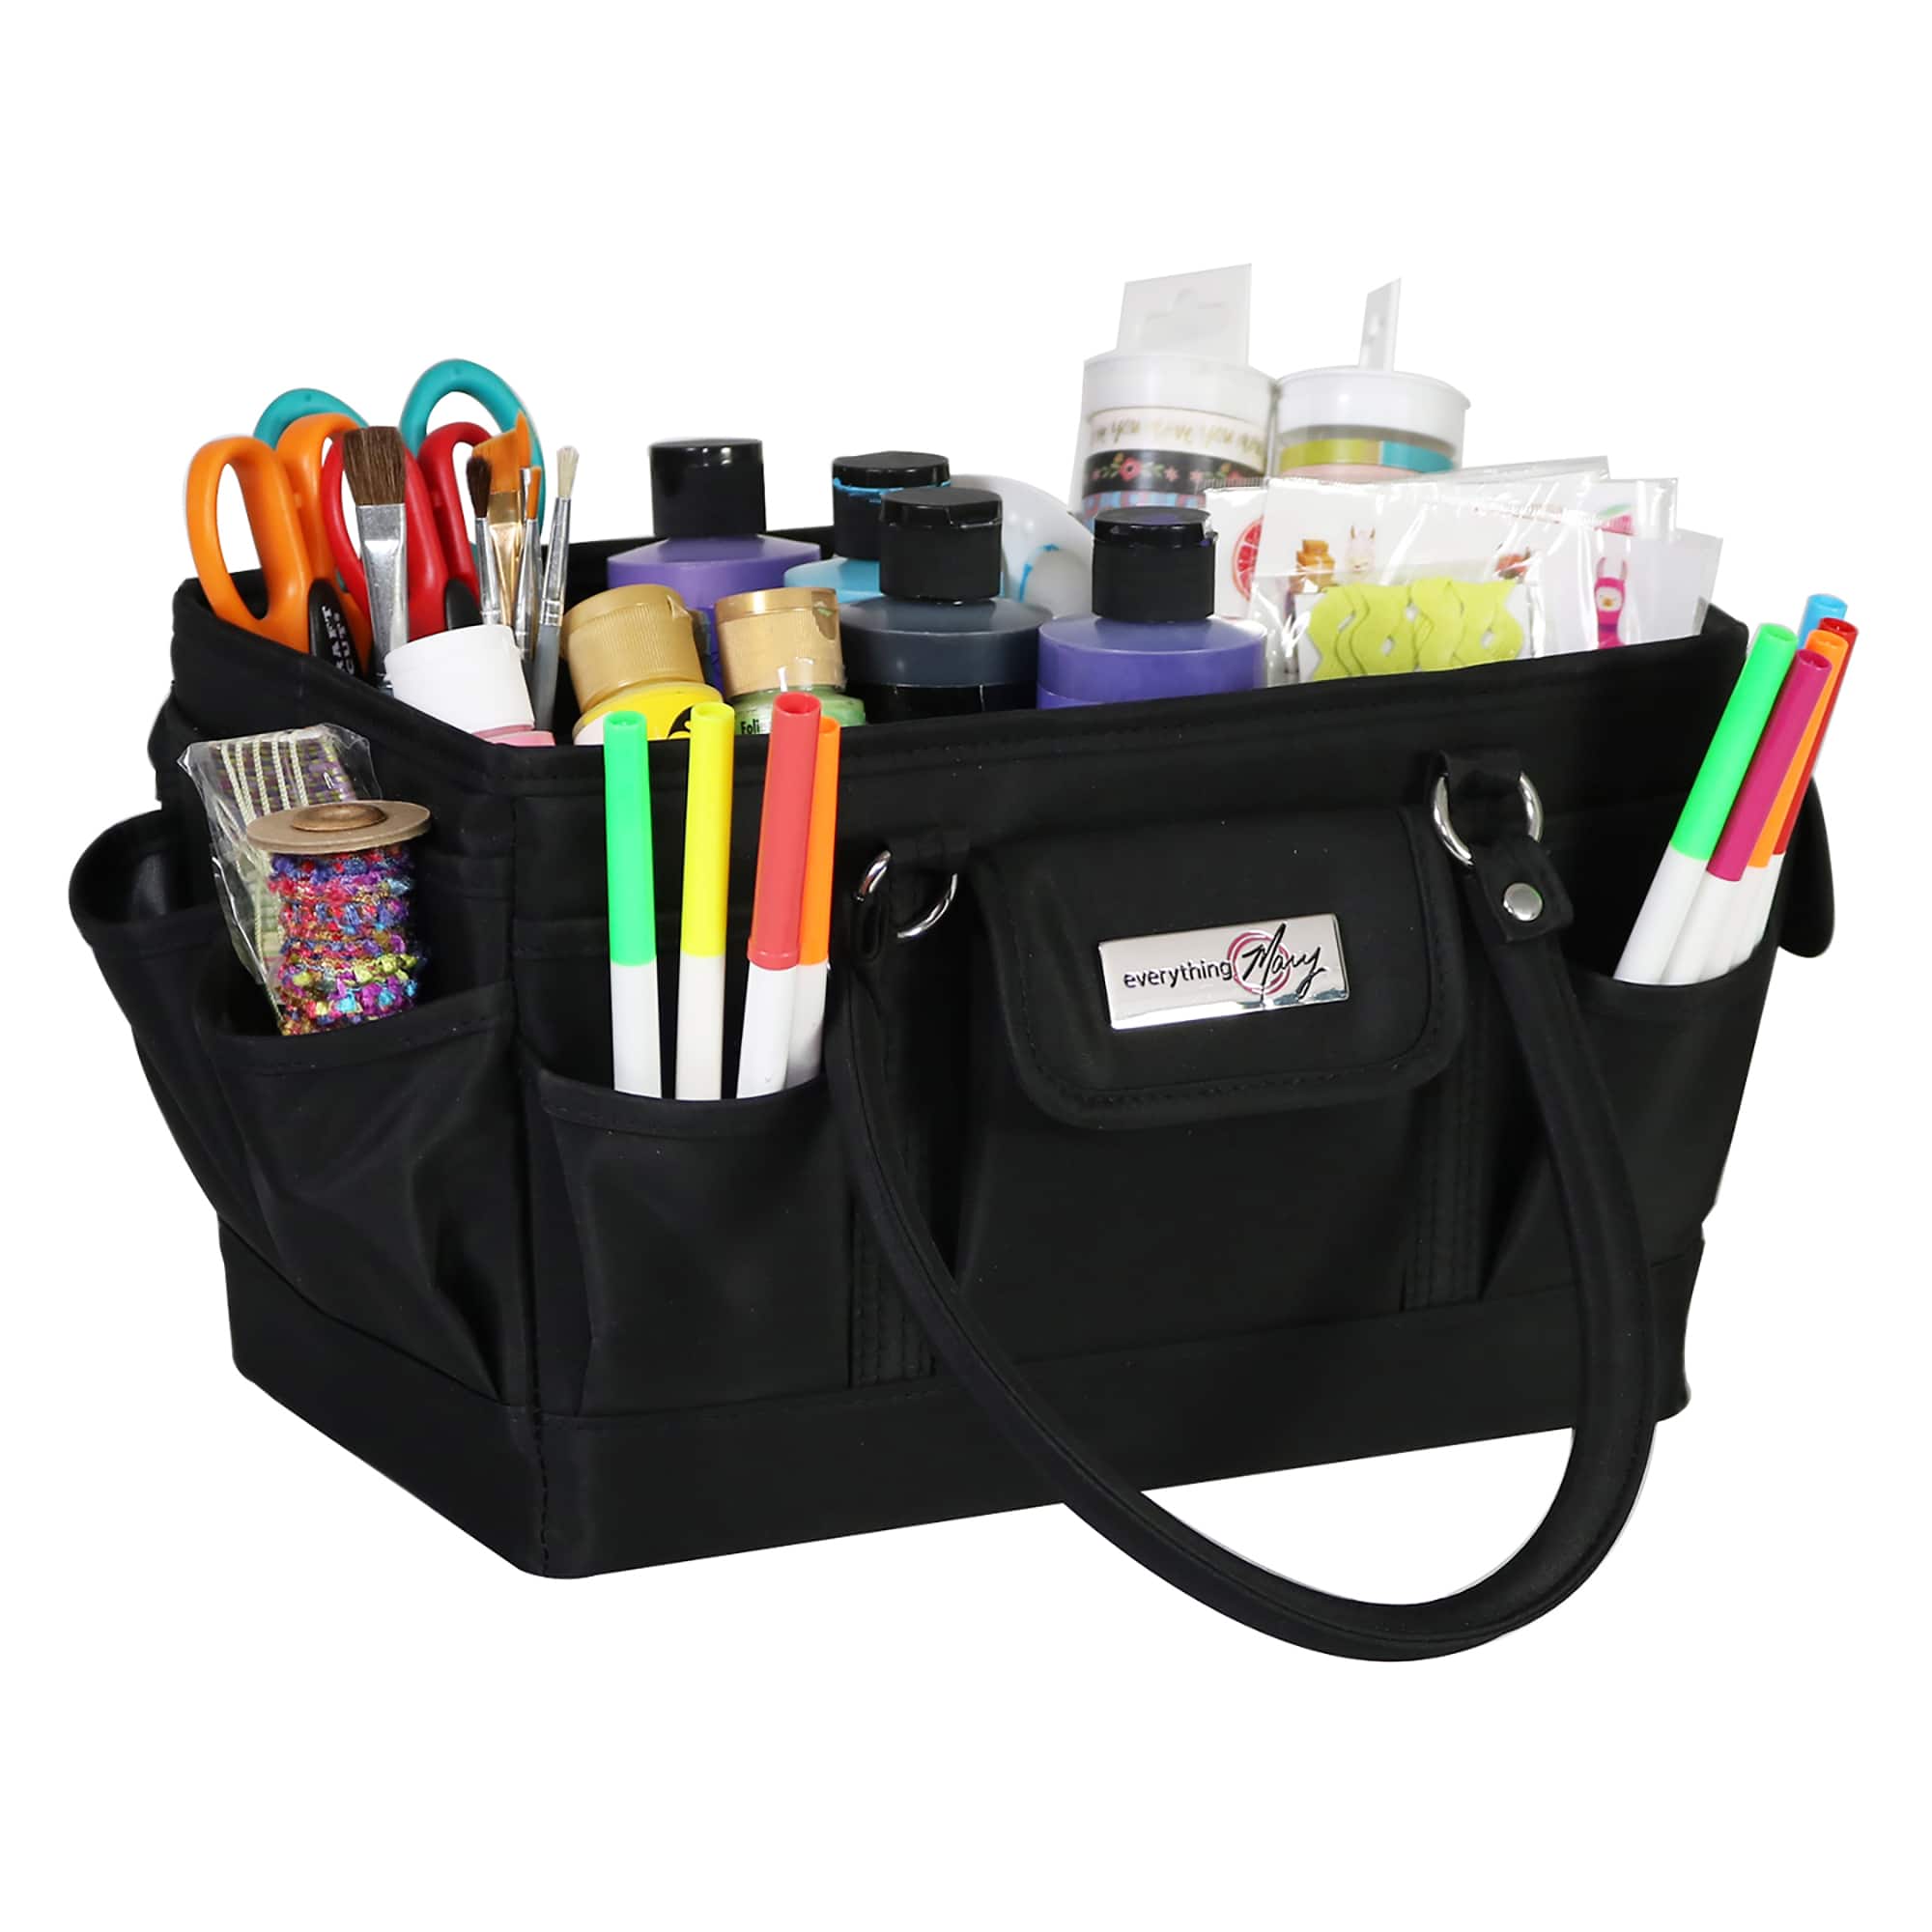 Everything Mary Black Deluxe Store &#x26; Tote Craft Organizer